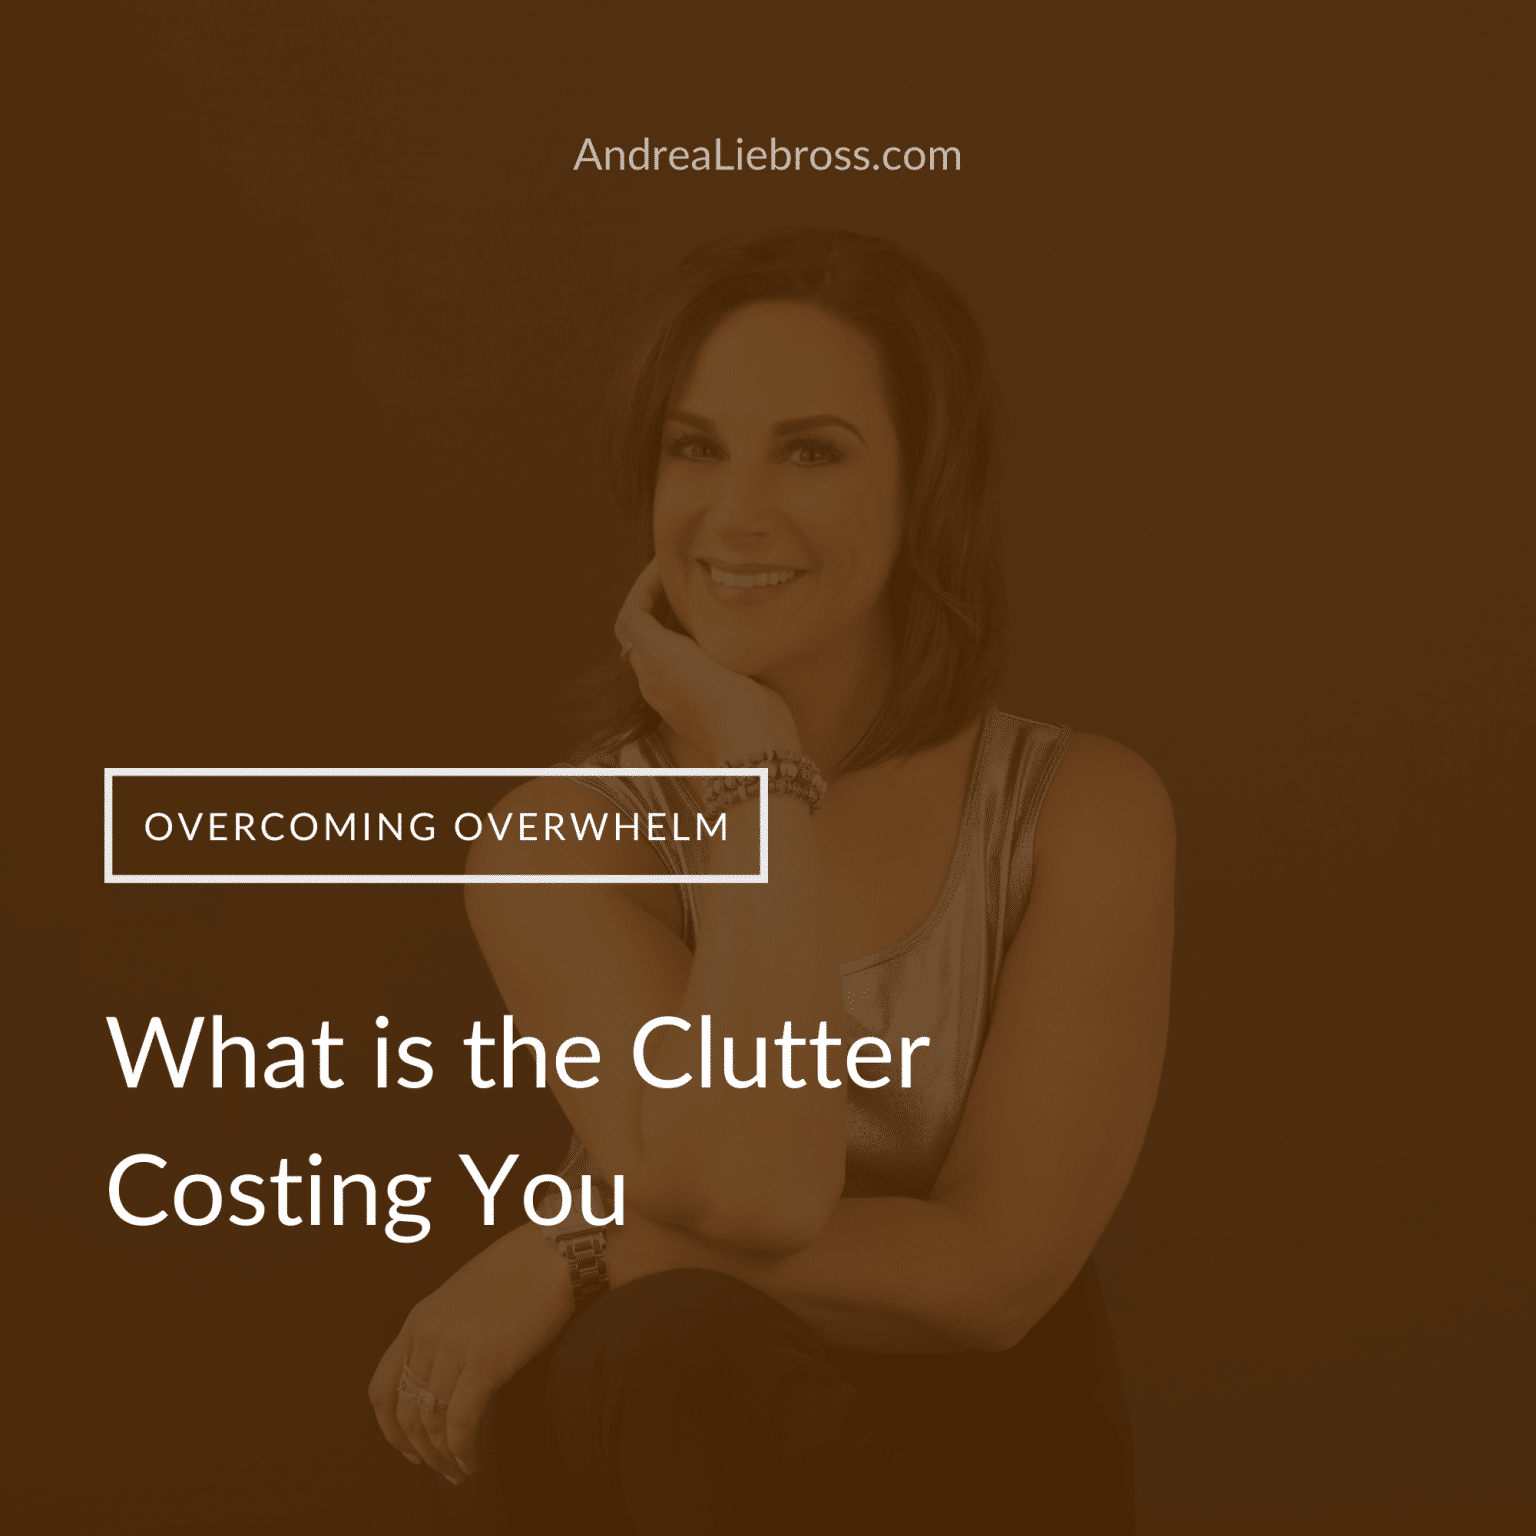 What is the Clutter Costing You